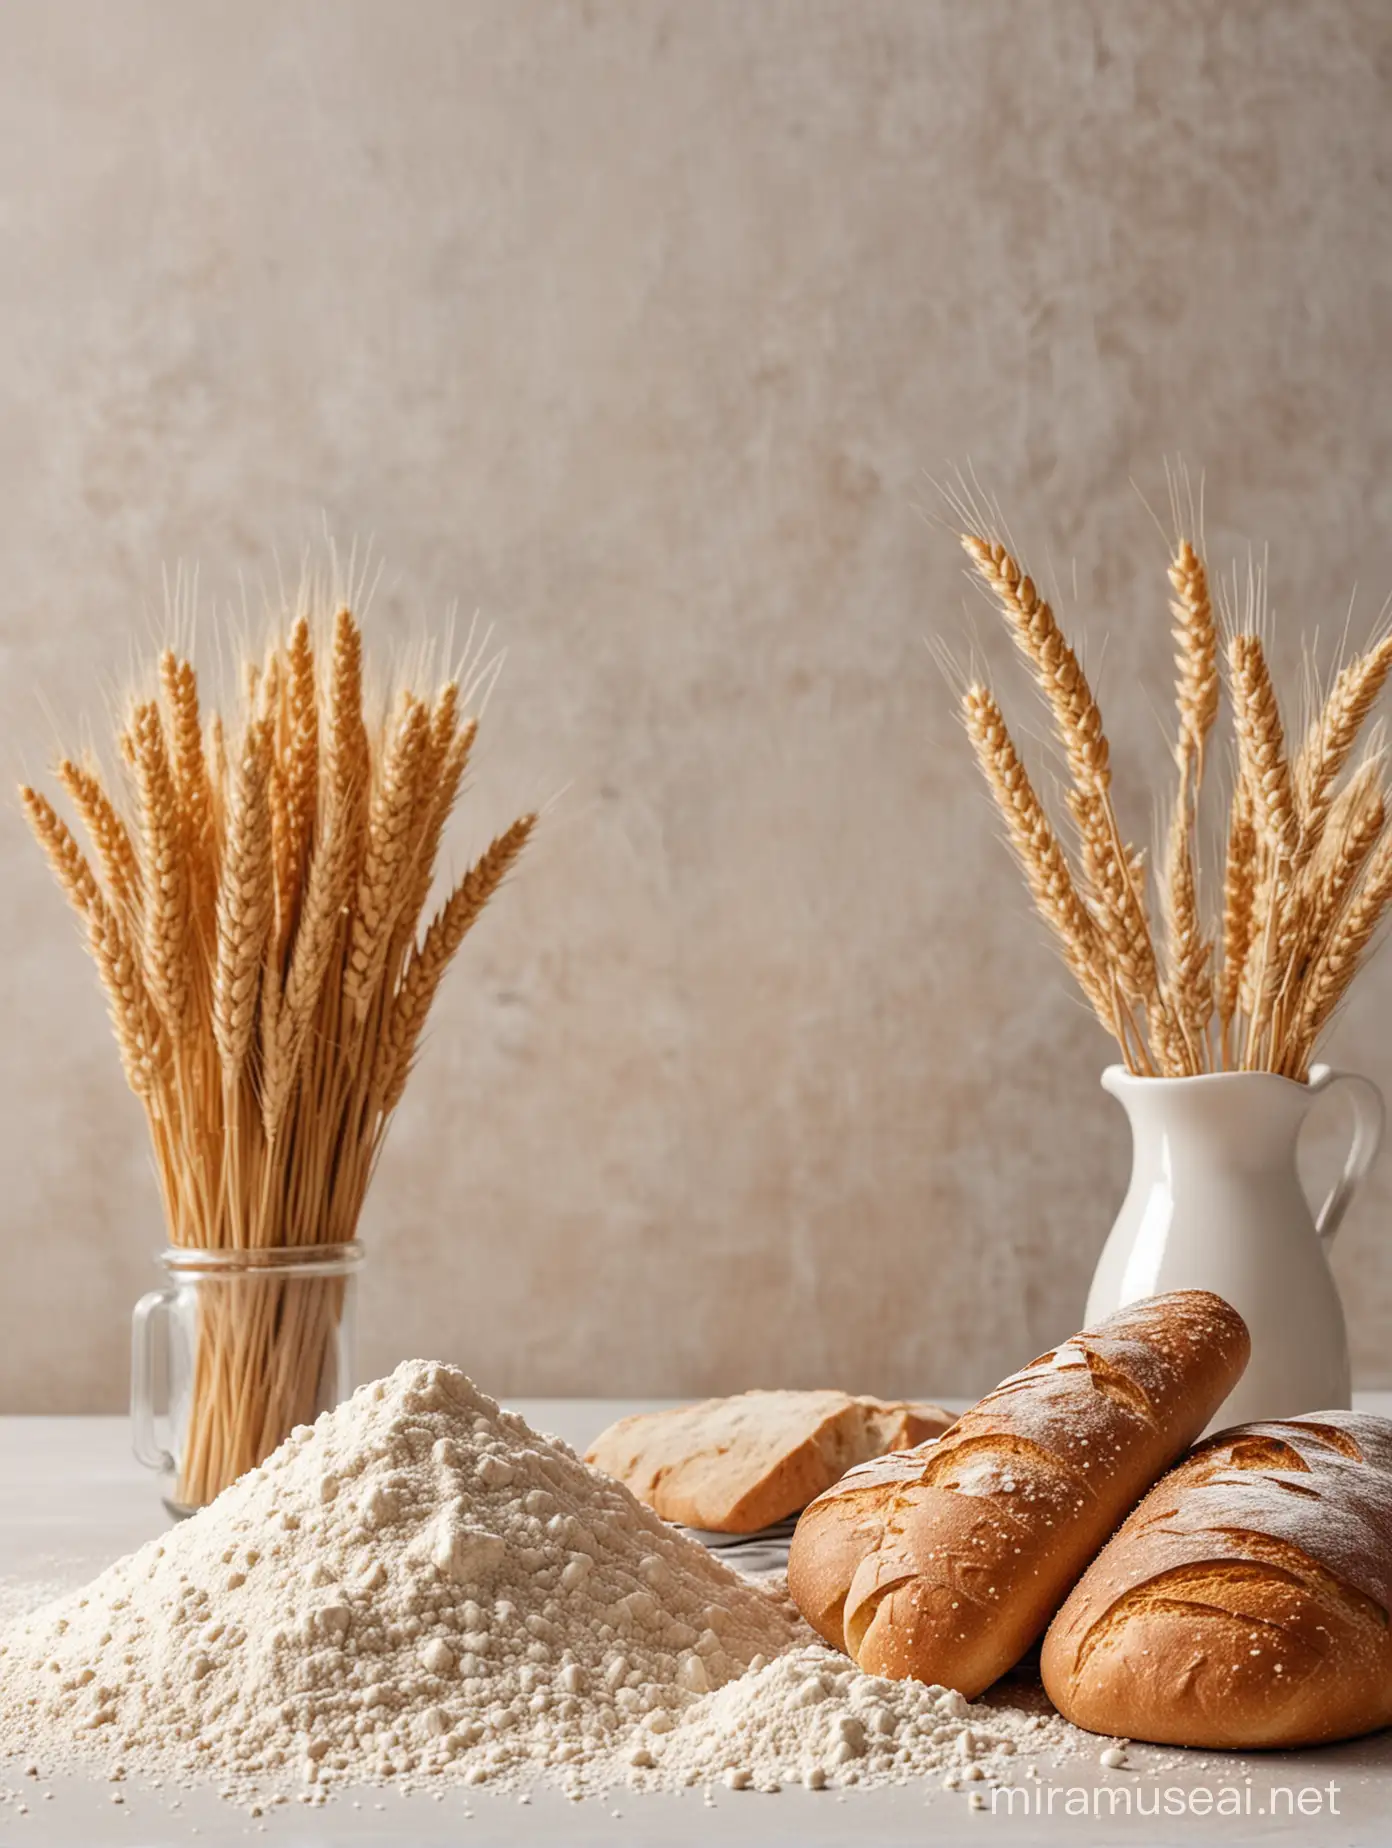 A bunch of wheat standing next to flour and some bread in a light background